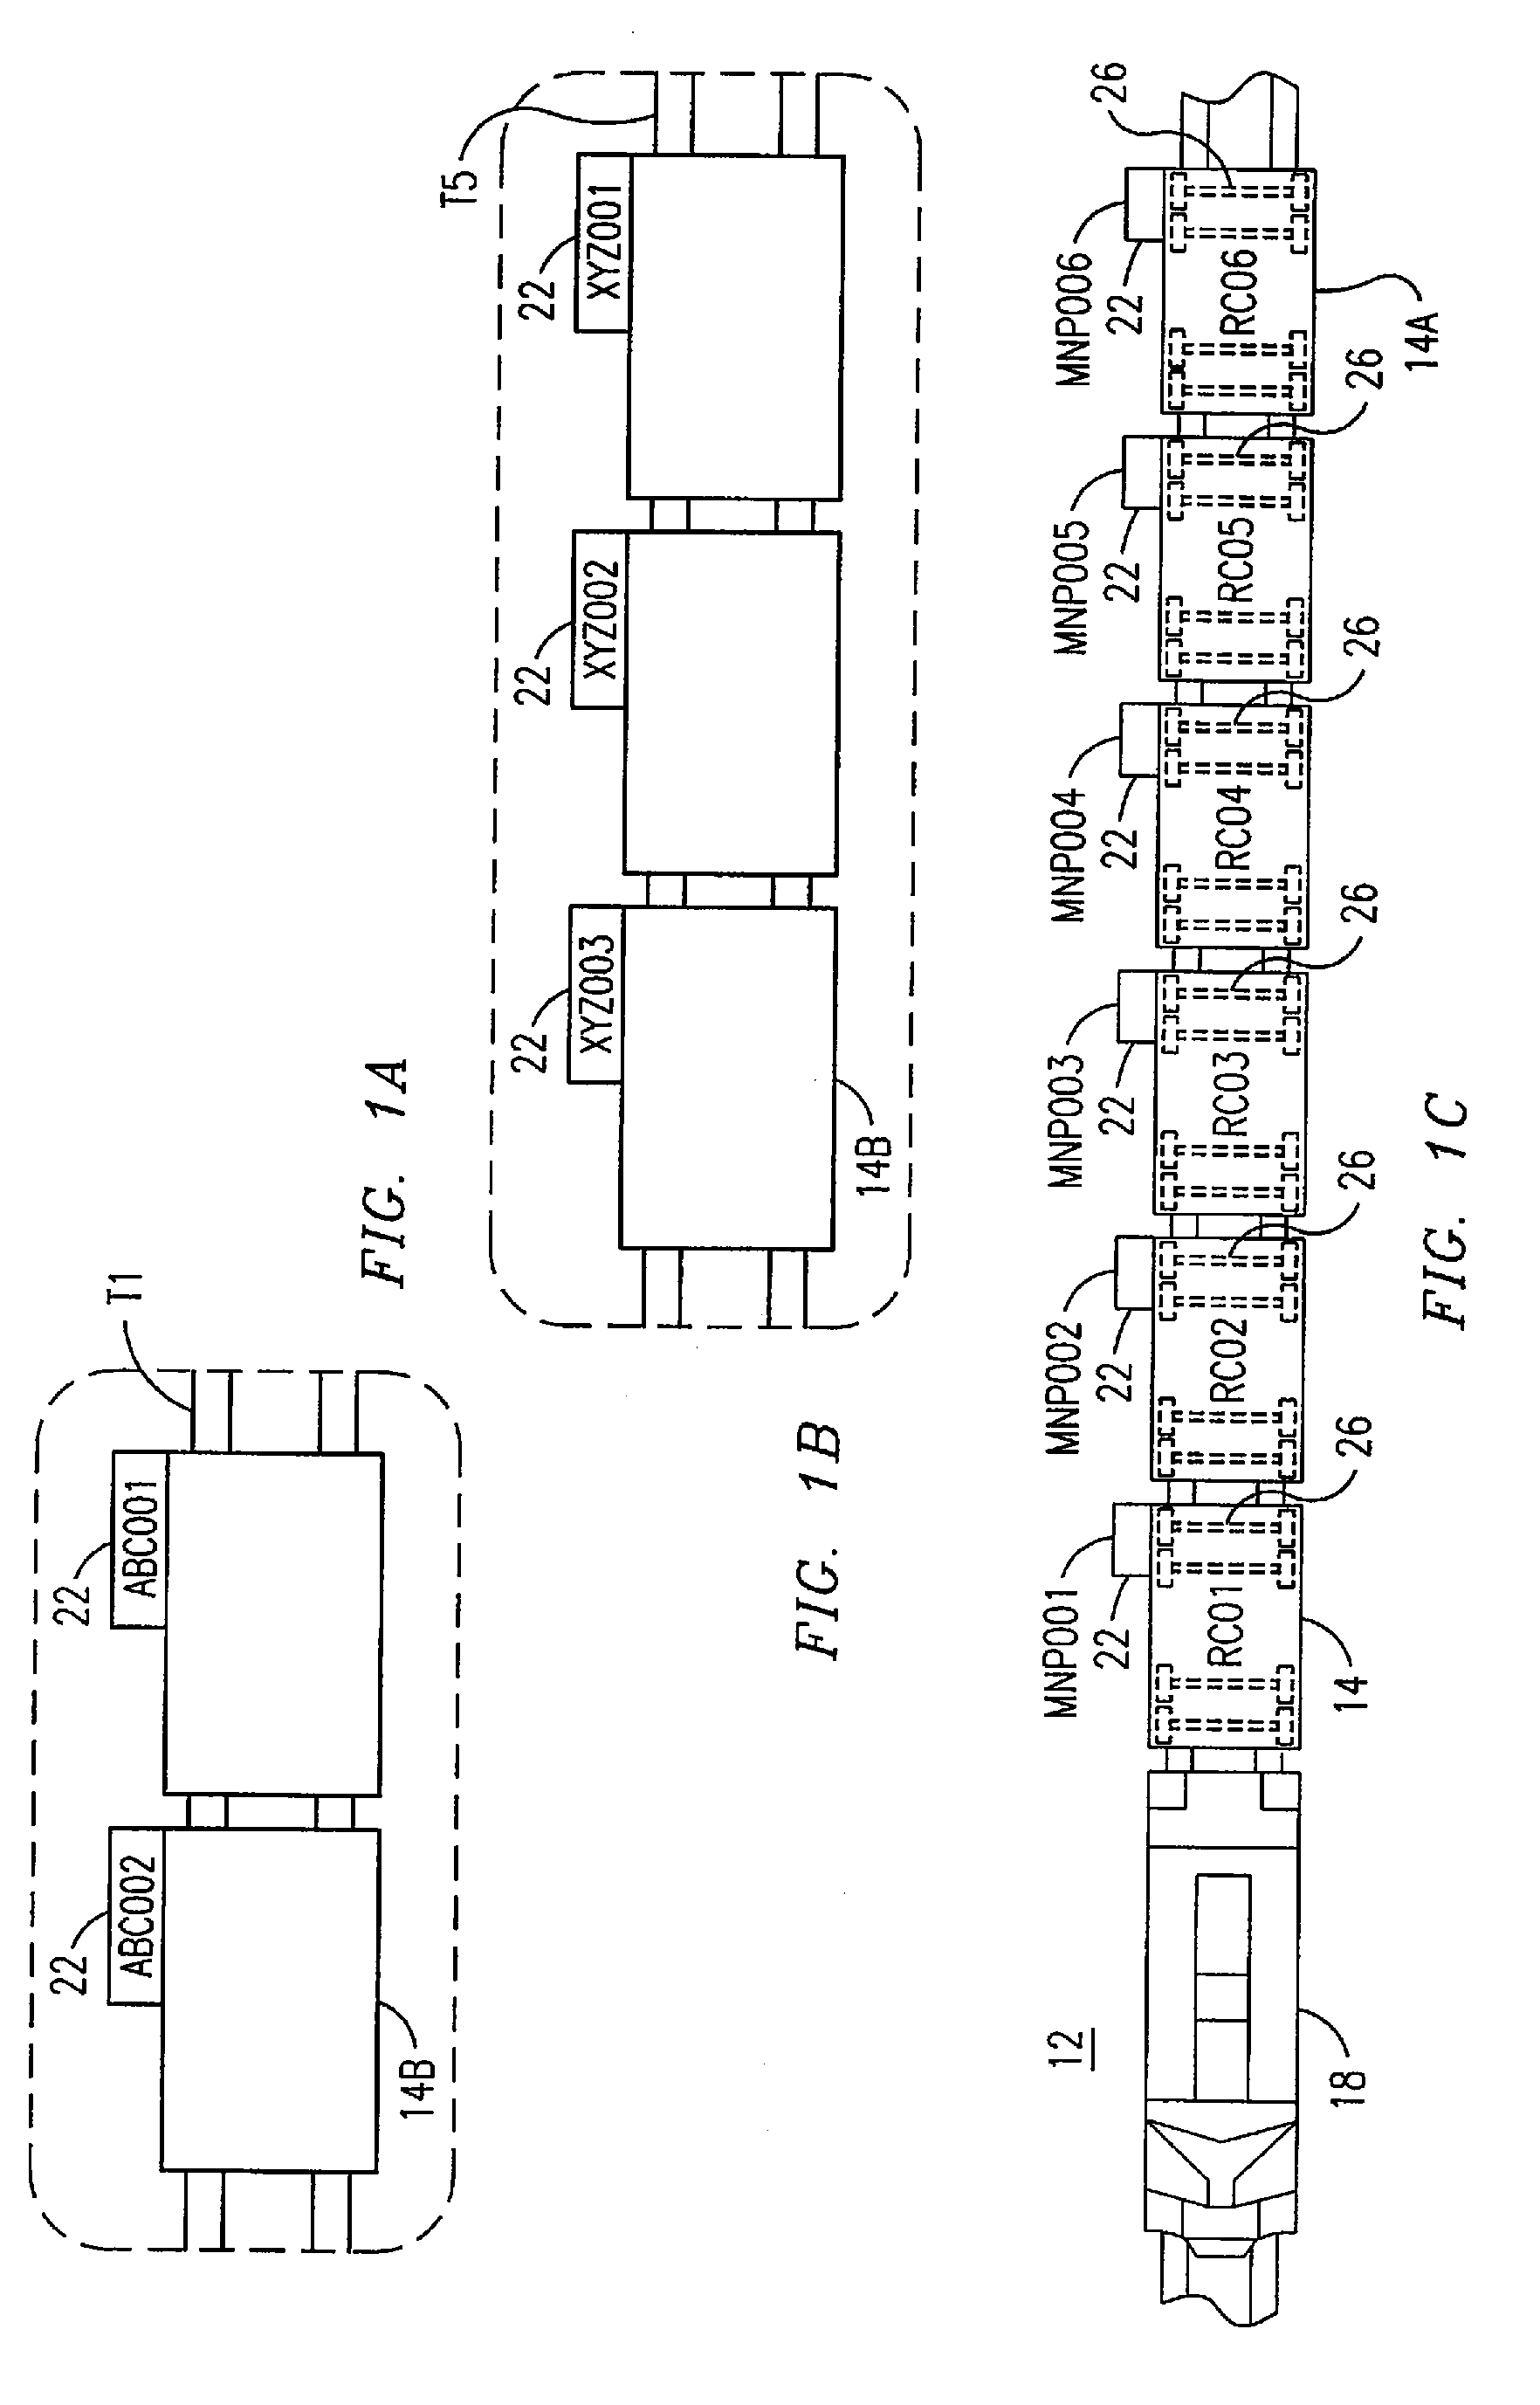 System, method and computer readable medium for tracking a railyard inventory